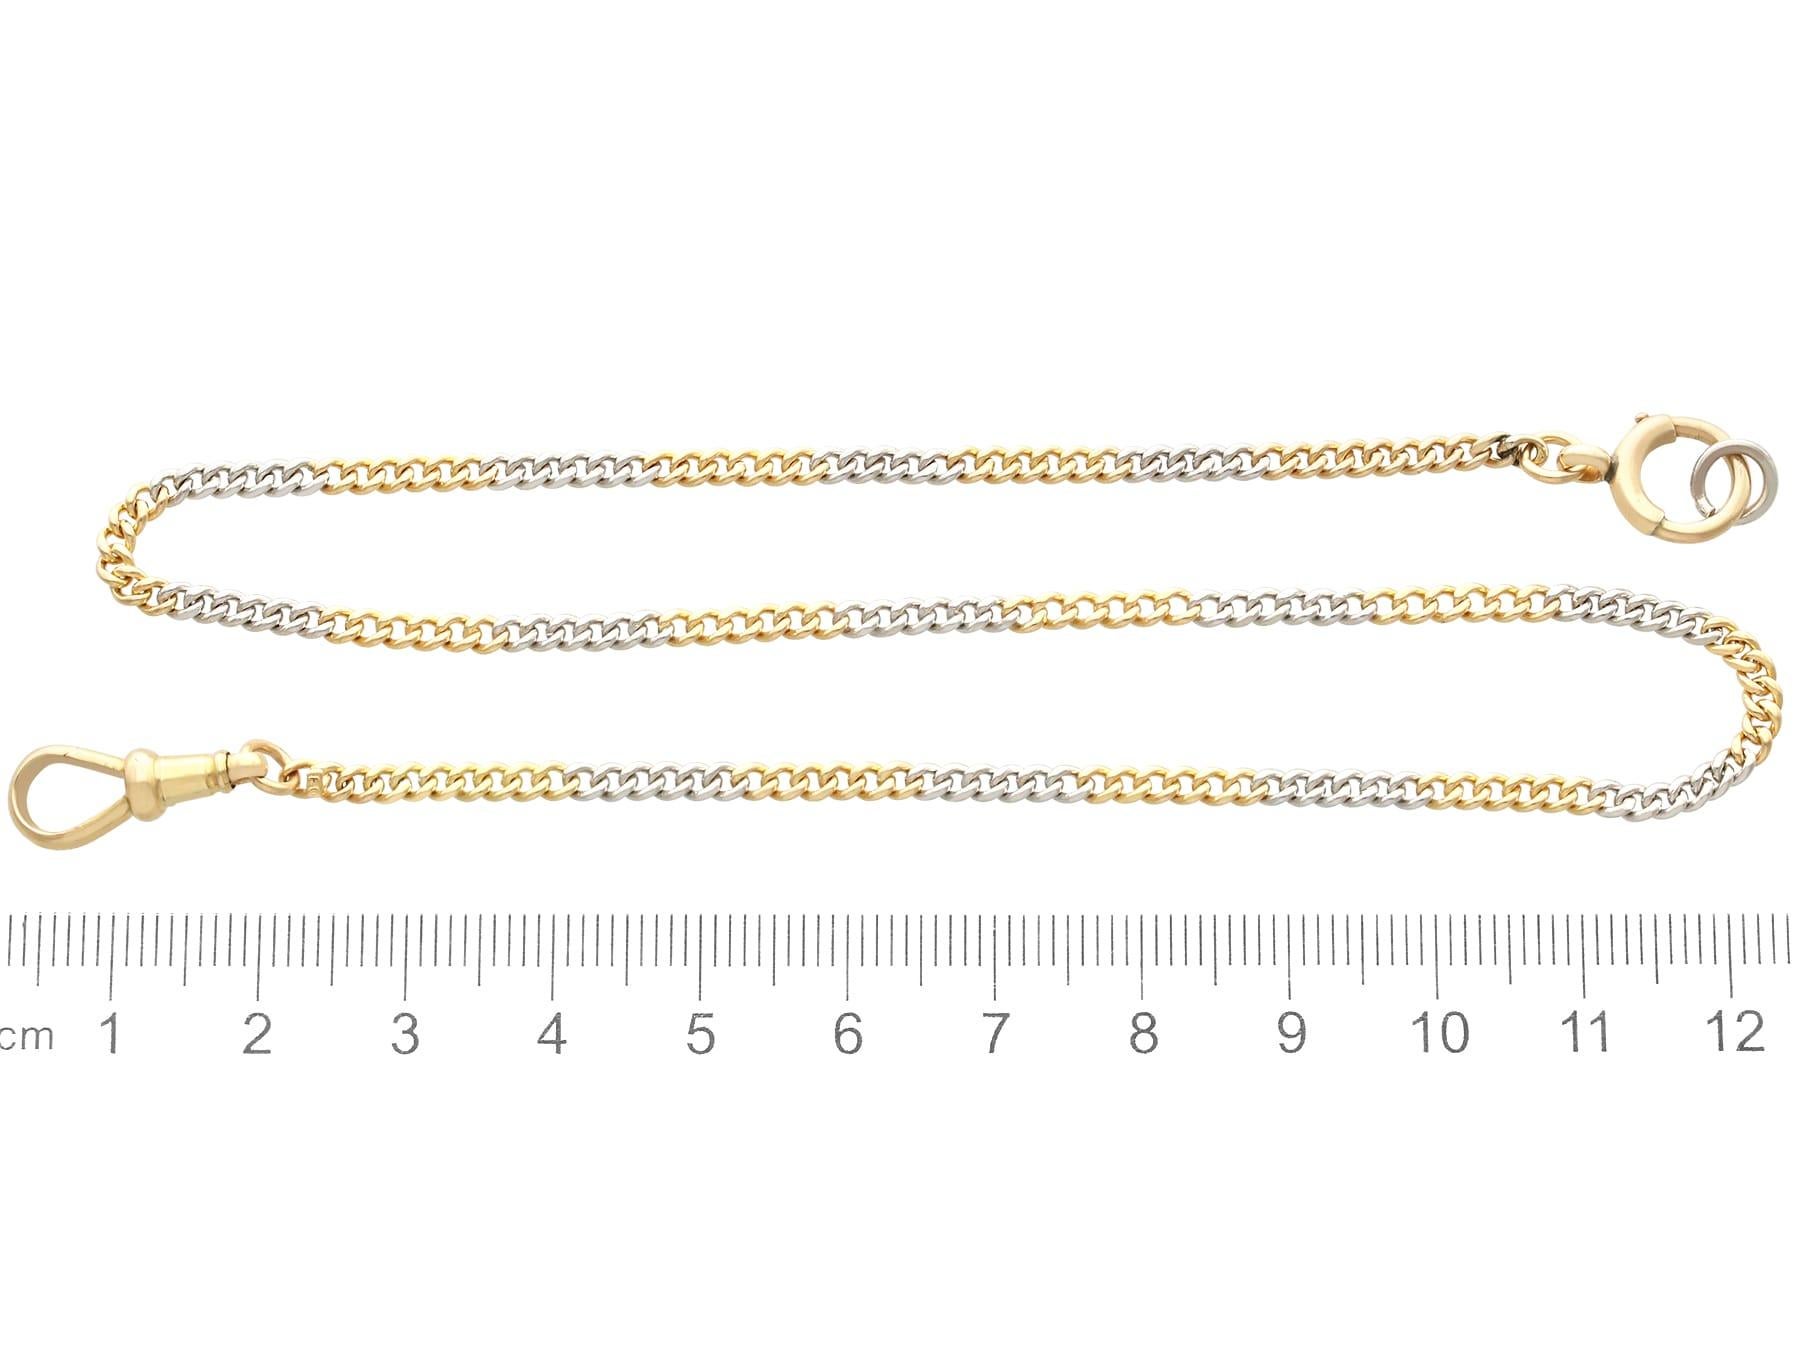 Antique 18k Yellow Gold and Platinum Ladies Fob Watch Chain Circa 1910 For Sale 1